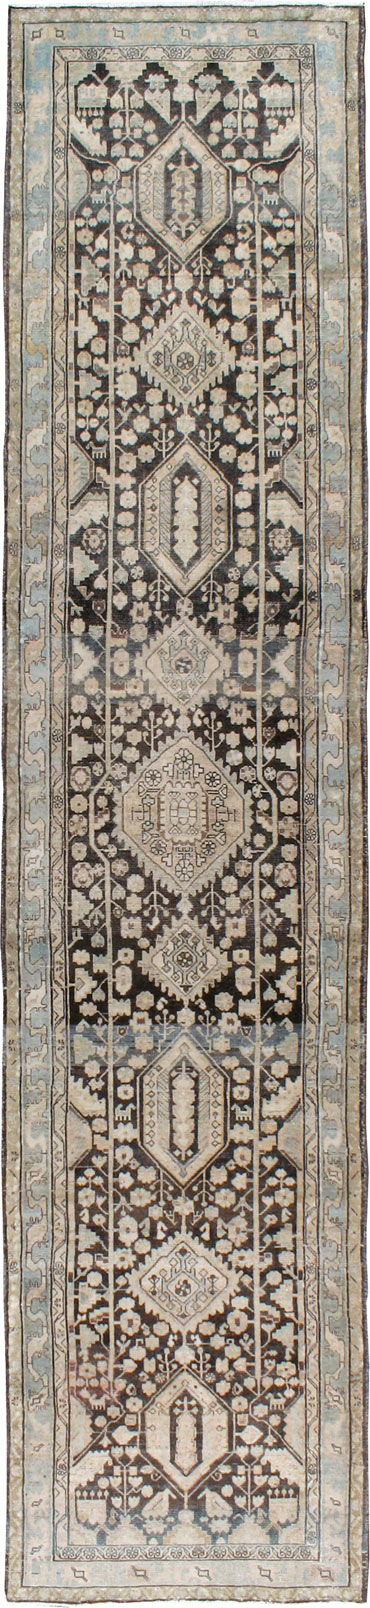 Antique Malayer Runner, No.21502 - Galerie Shabab